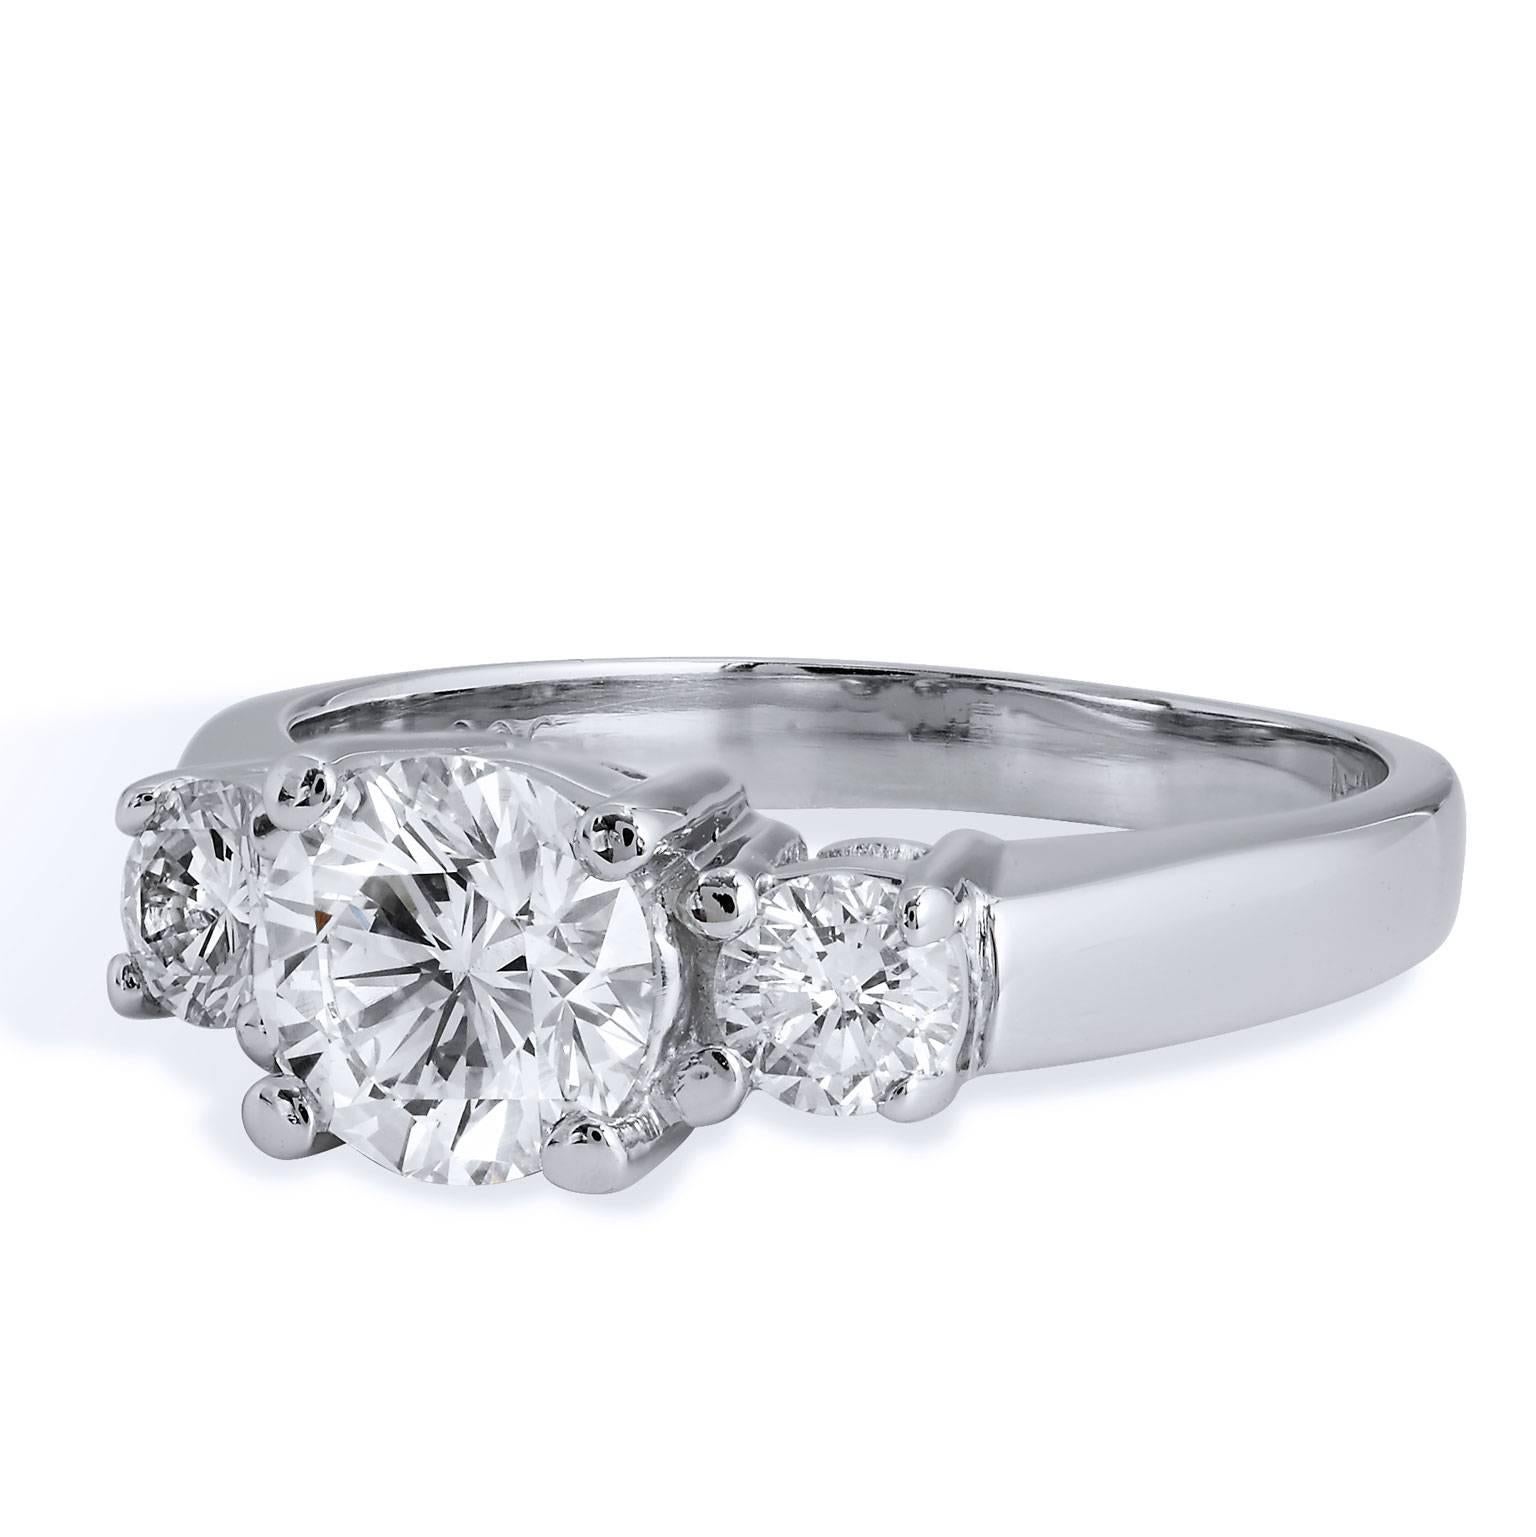 This chic and traditional platinum three stone diamond engagement ring features a 1.05 carat diamond at center stone (G/SI1/RBC; GIA # 14303888) while two pieces of 0.38 carats of diamond (G/H/SI2) are affixed at the shoulder. The tasteful front